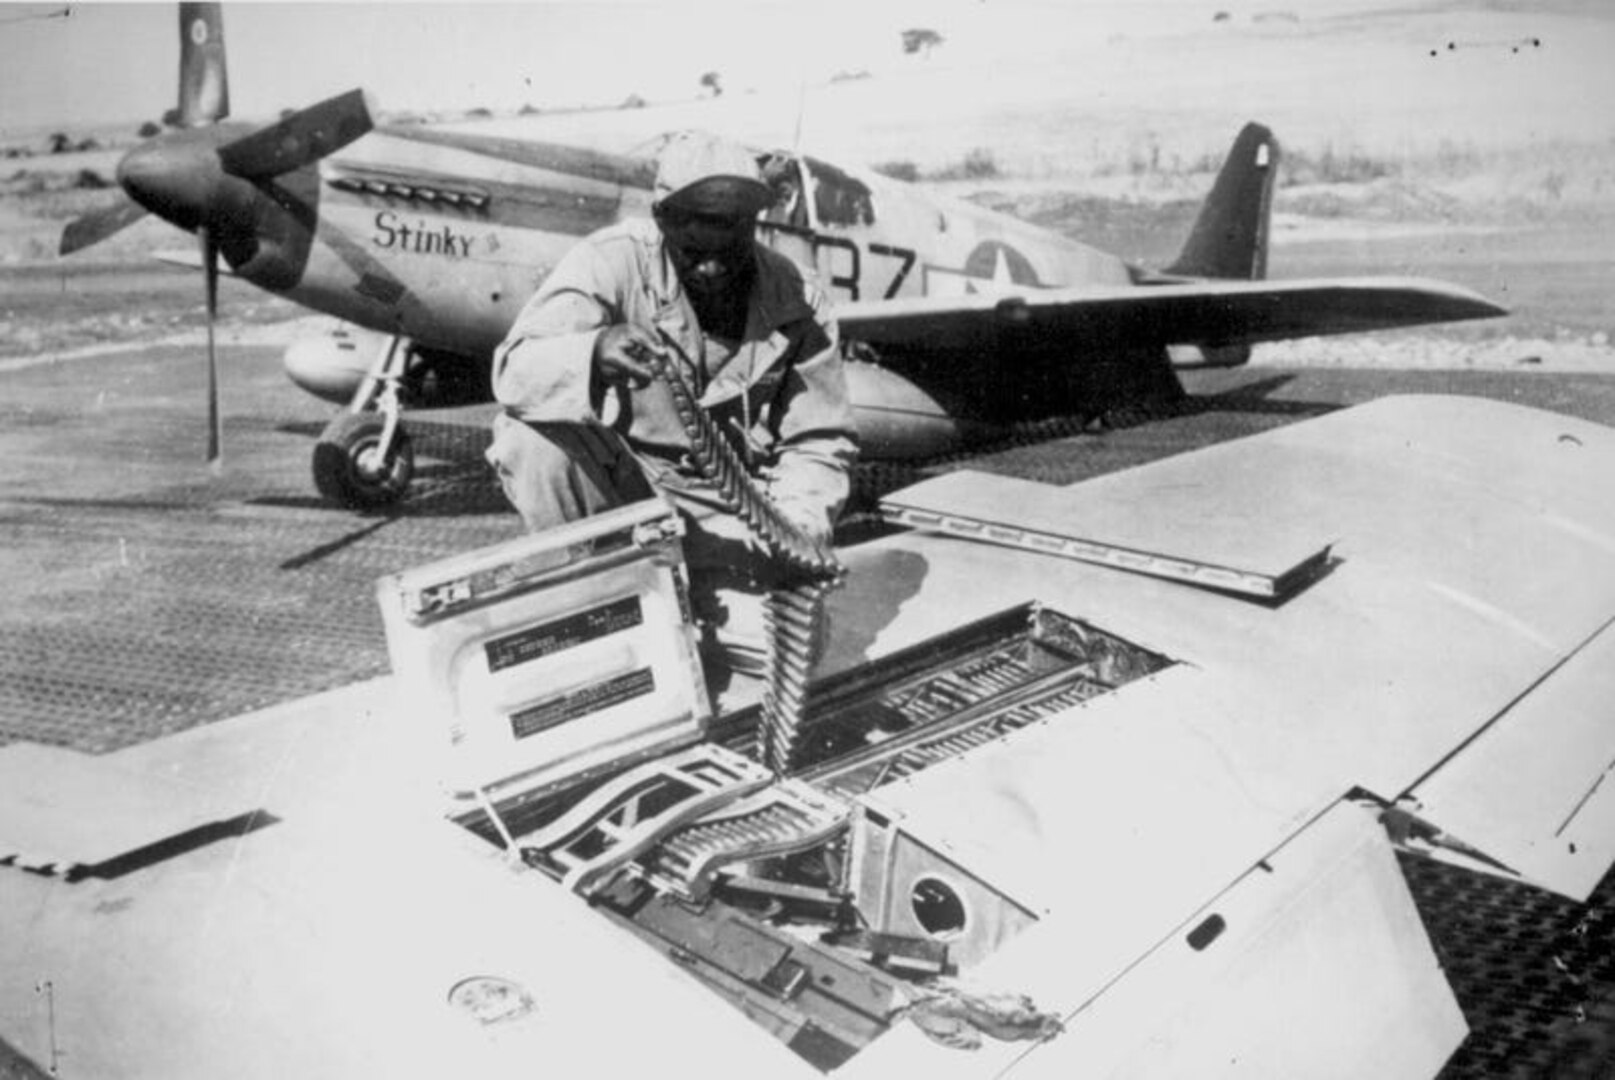 Editor’s note: photo and caption were pulled from the National Archives Catalog.
An armorer of the 15th U.S. Air Force checks ammunition belts of the .50 caliber machine guns in the wings of a P-51 Mustang fighter plane before leaving an Italian base for a mission against German military targets. The 15th Air Force was organized for long-range assault missions, and its fighters and bombers range over enemy targets in occupied and satellite nations, as well as Germany itself. 
Ca. September 1944. 208-MO-18H-32984.